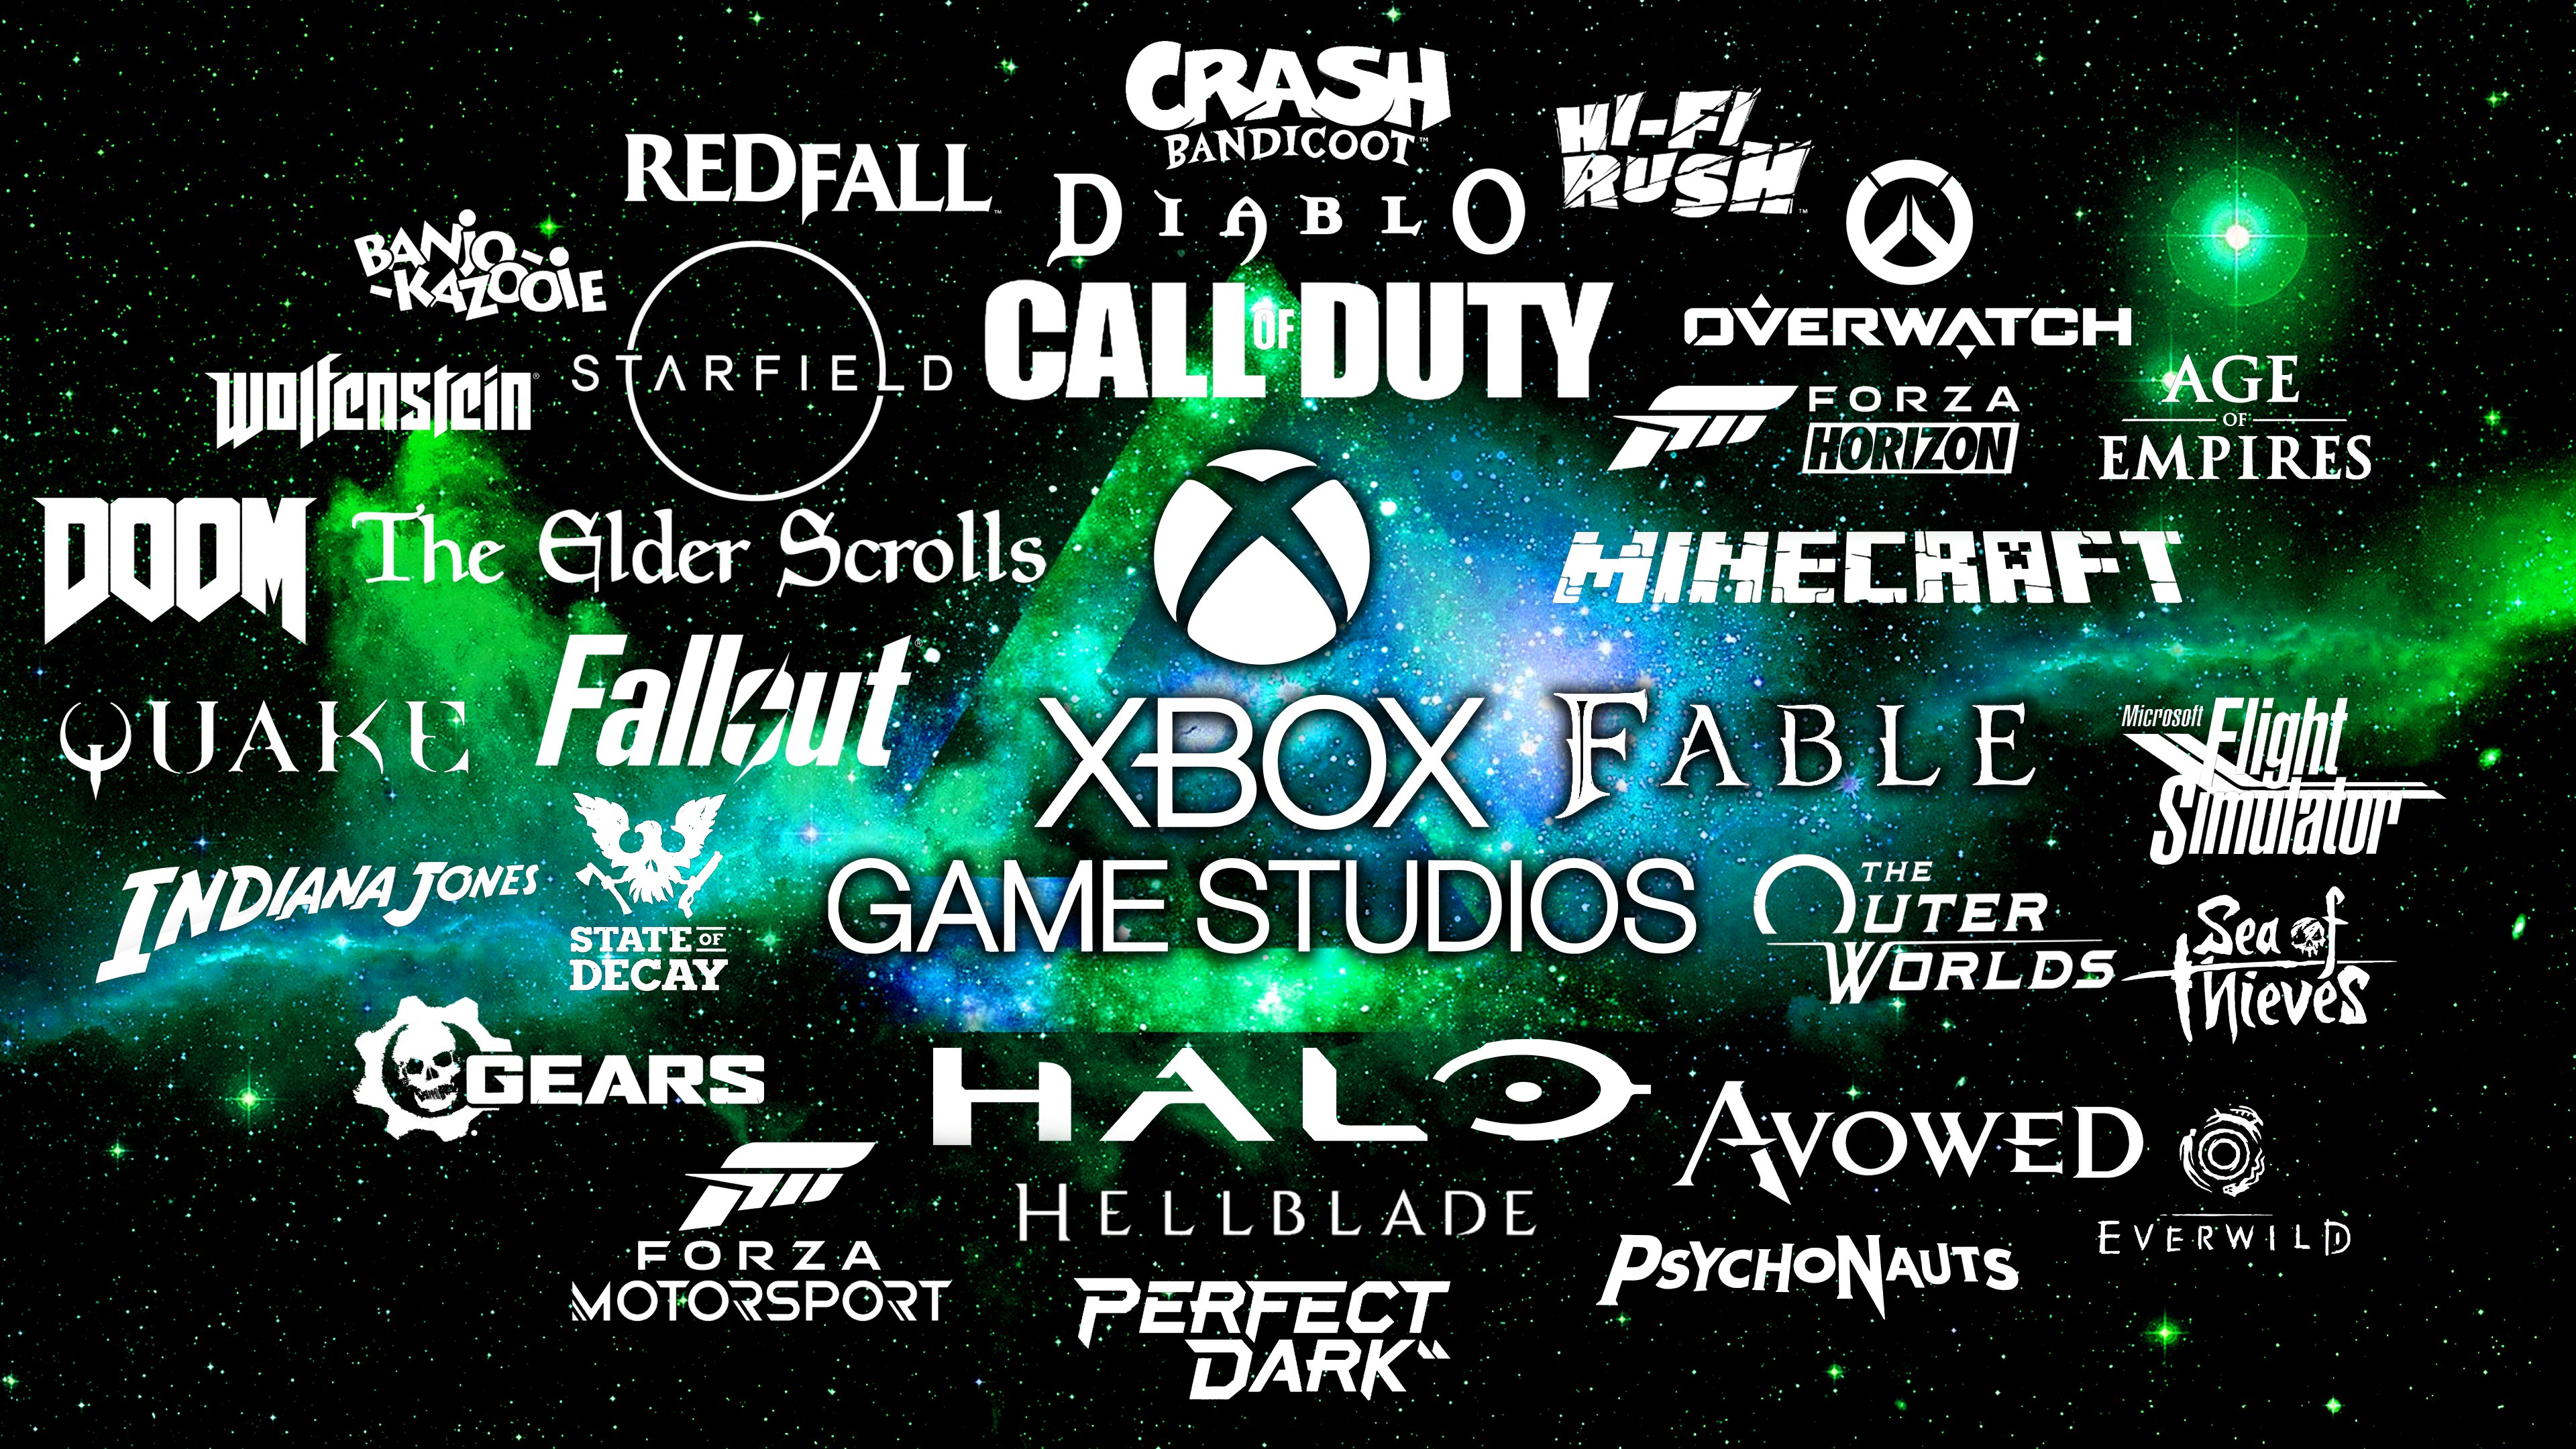 colteastwood on X: Xbox & Playstation First Party Studios have an AMAZING  Games Roadmap with even more games from partners and unannounced titles we  should hear from Summer 2024! Great to see